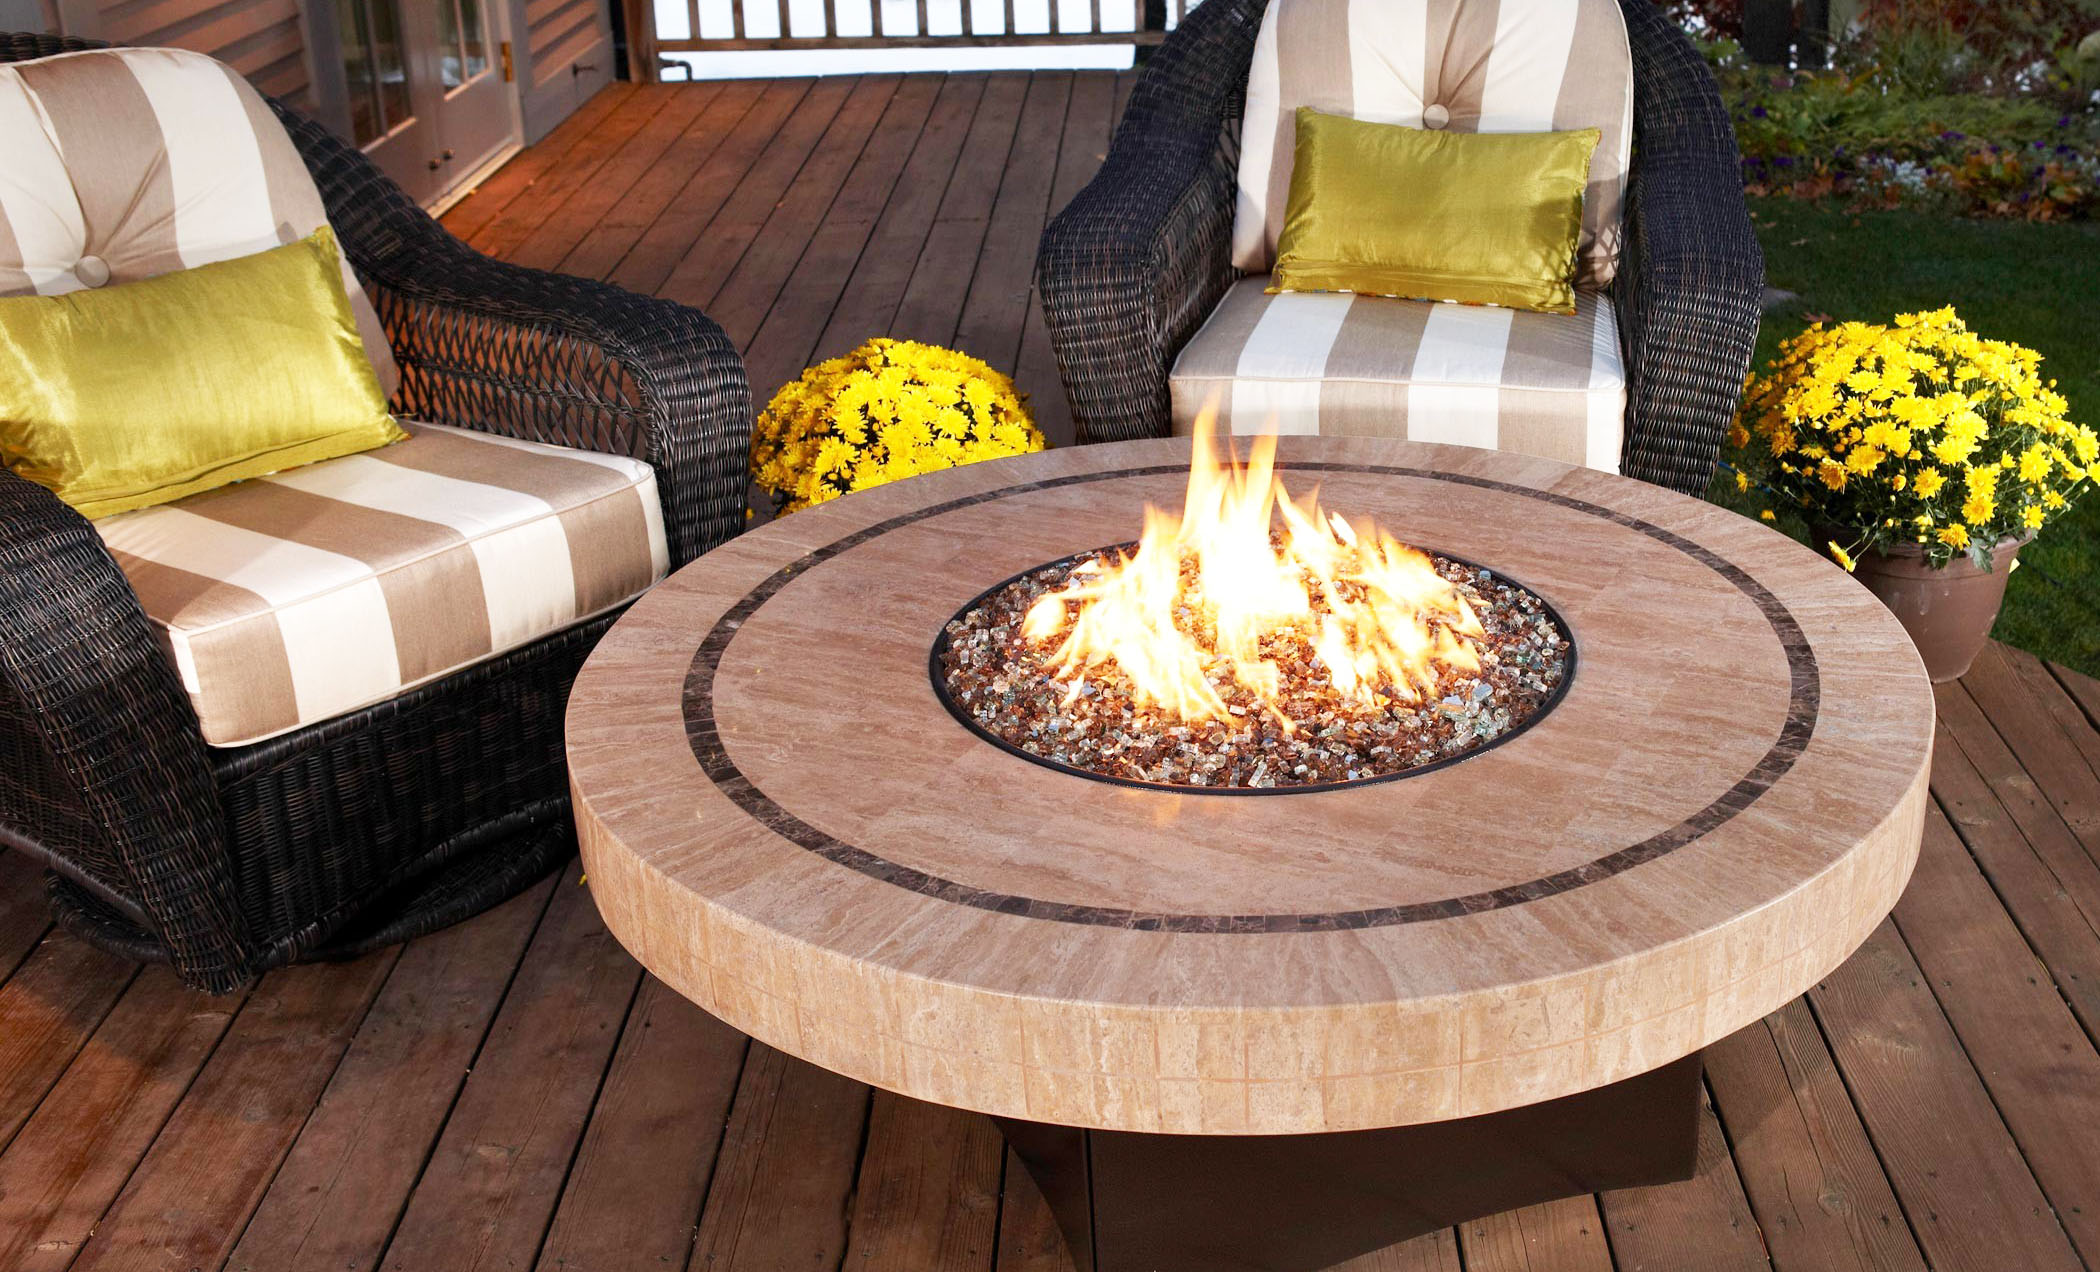 Tabletop Fire Pit Kit Diy How To Make, Custom Gas Fire Pits Outdoor